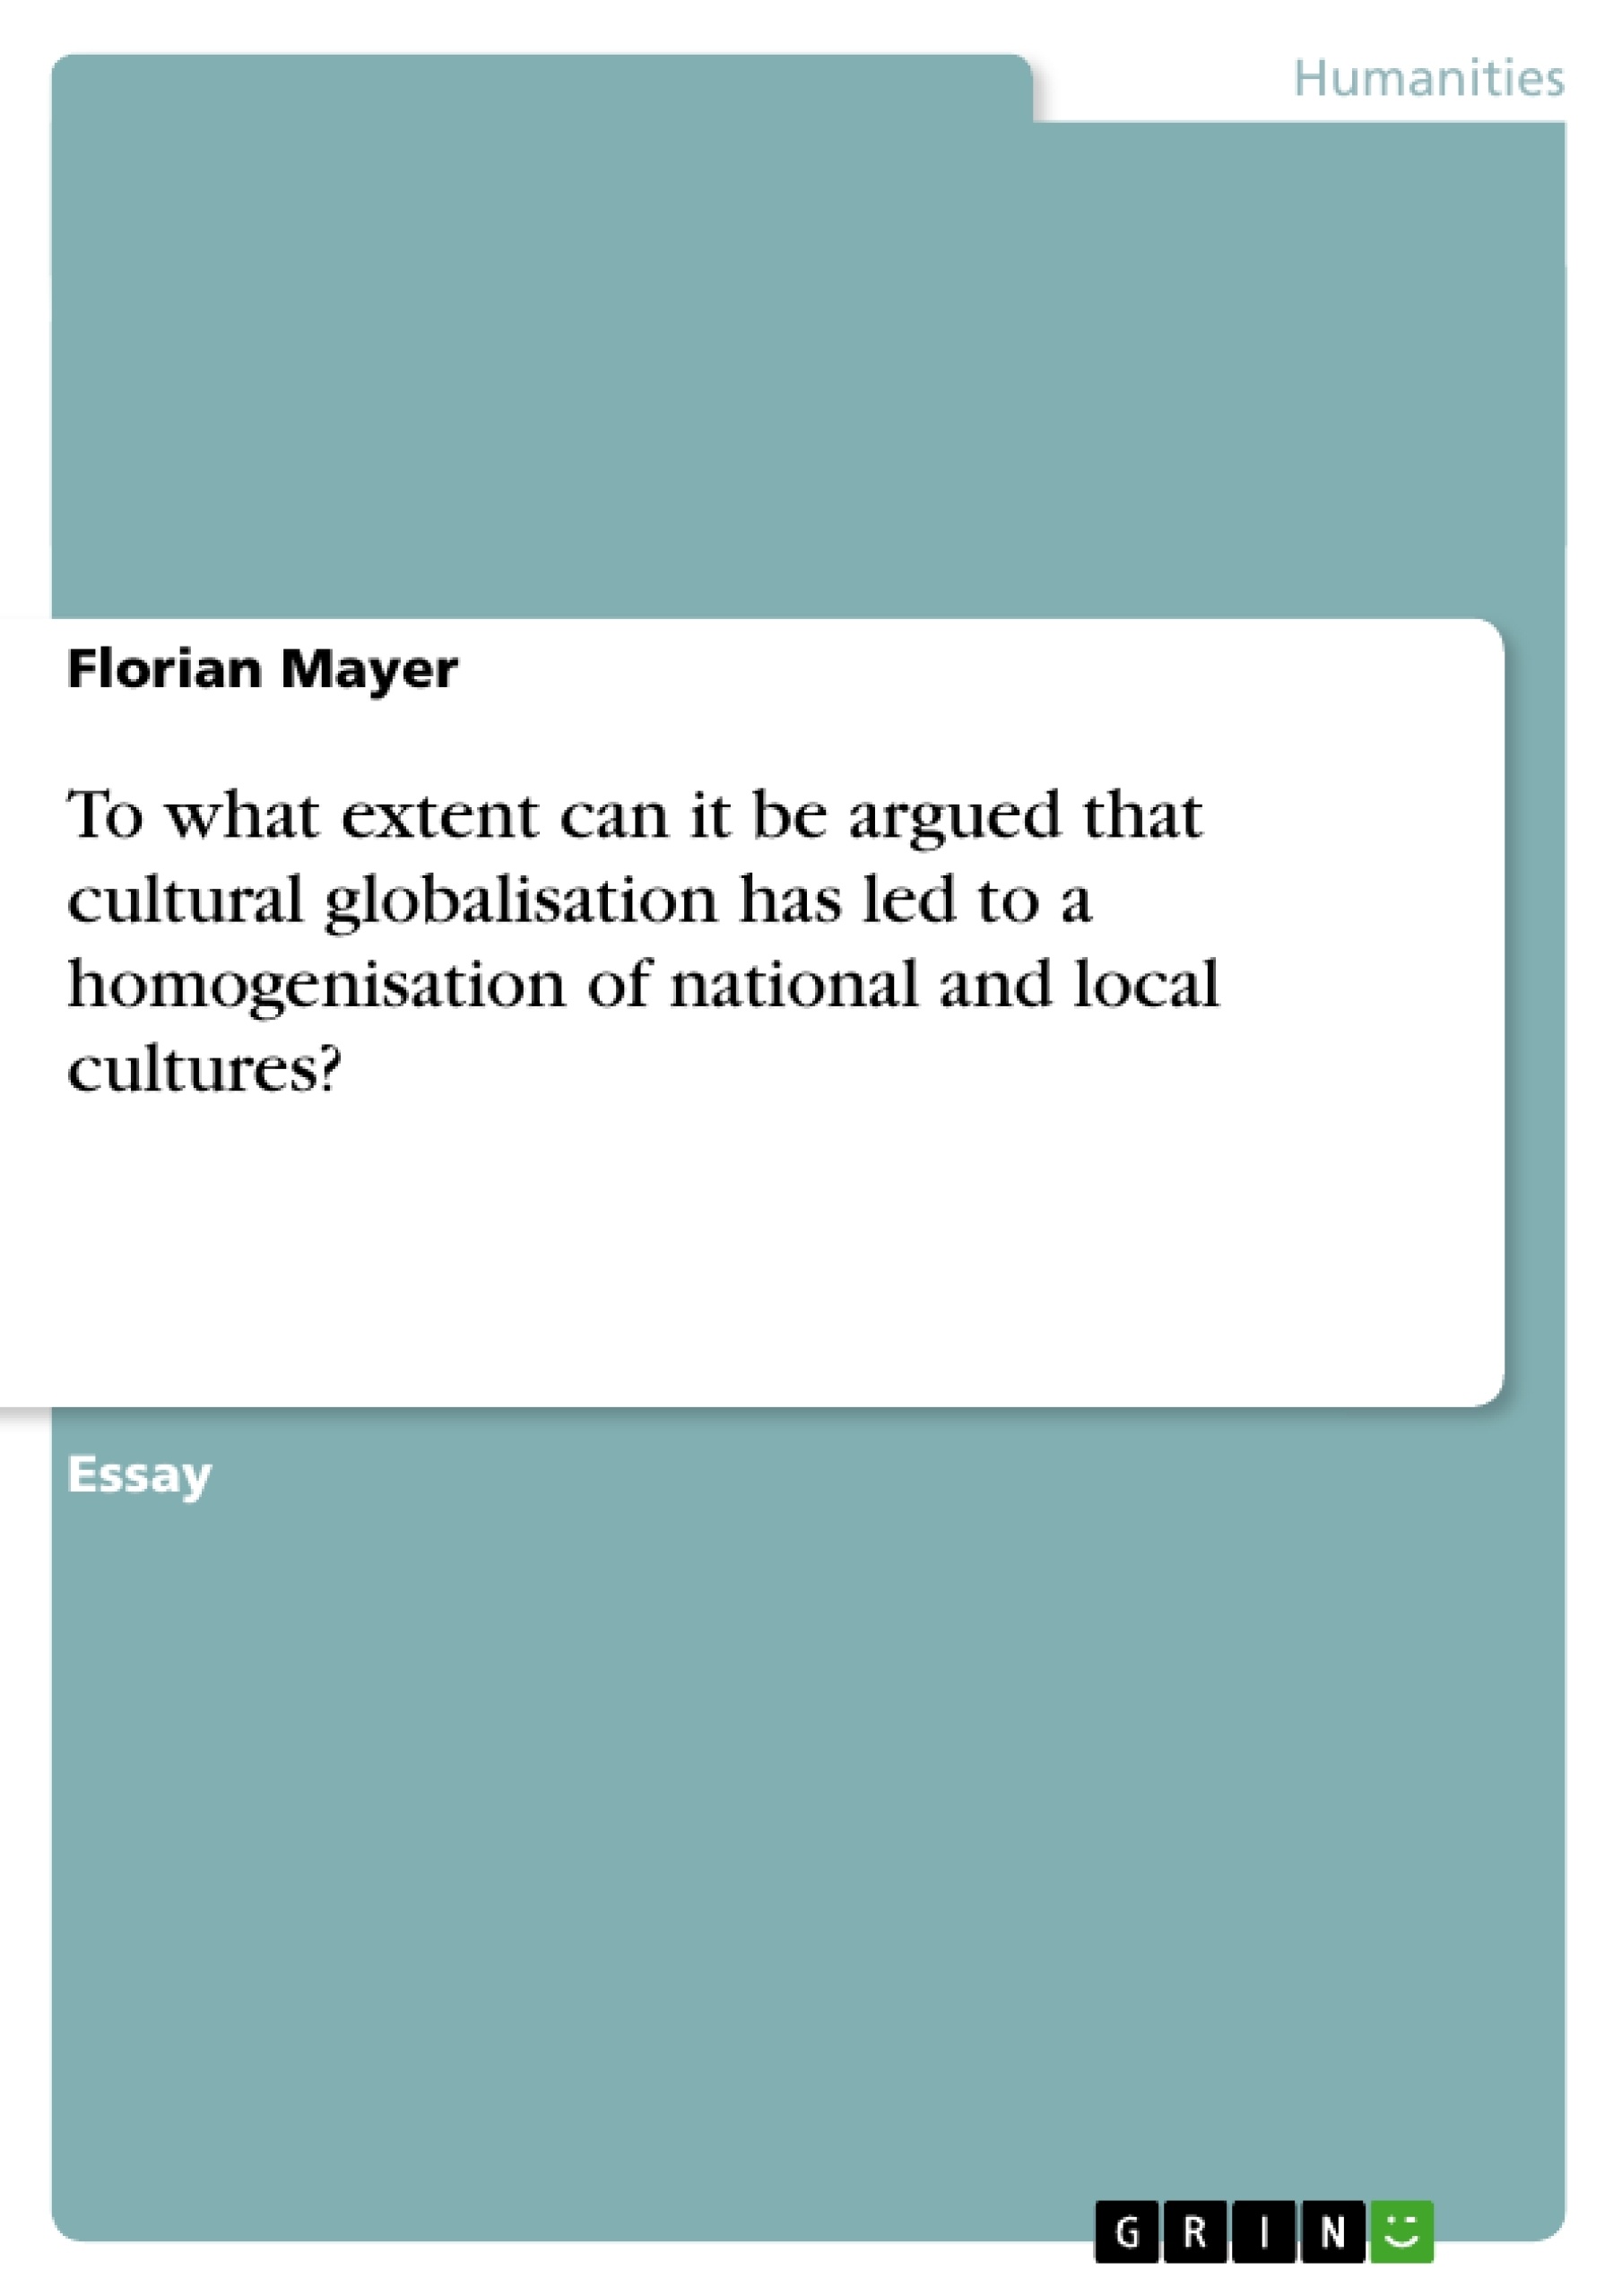 Título: To what extent can it be argued that cultural globalisation has led to a homogenisation of national and local cultures?